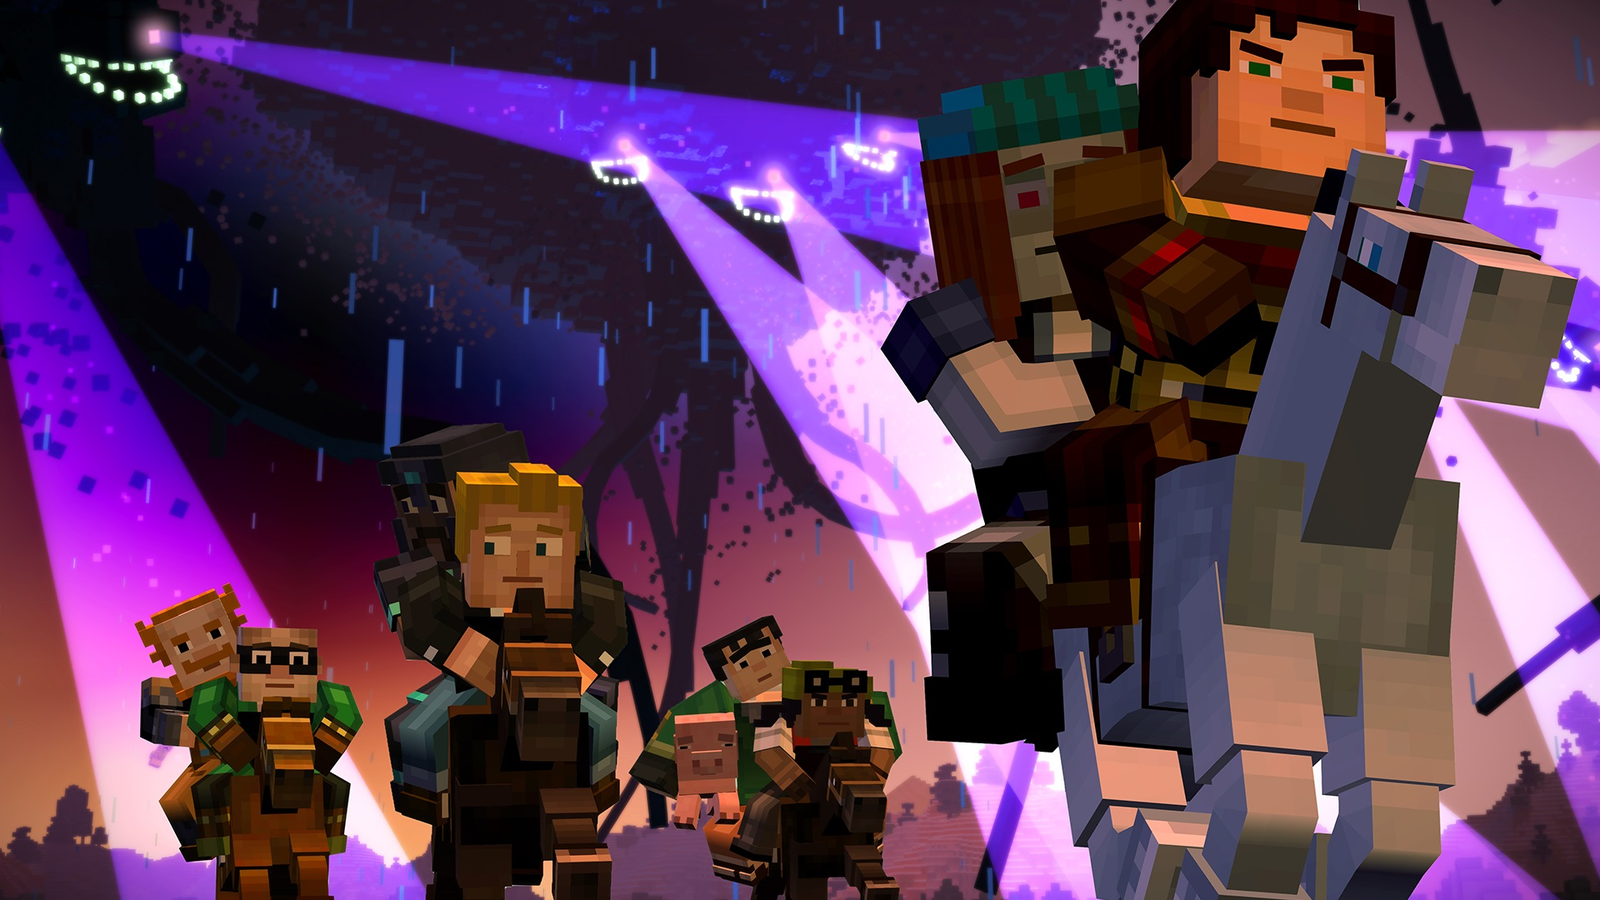 In A Few Weeks, Minecraft: Story Mode Will Be Impossible To Download  [Update]